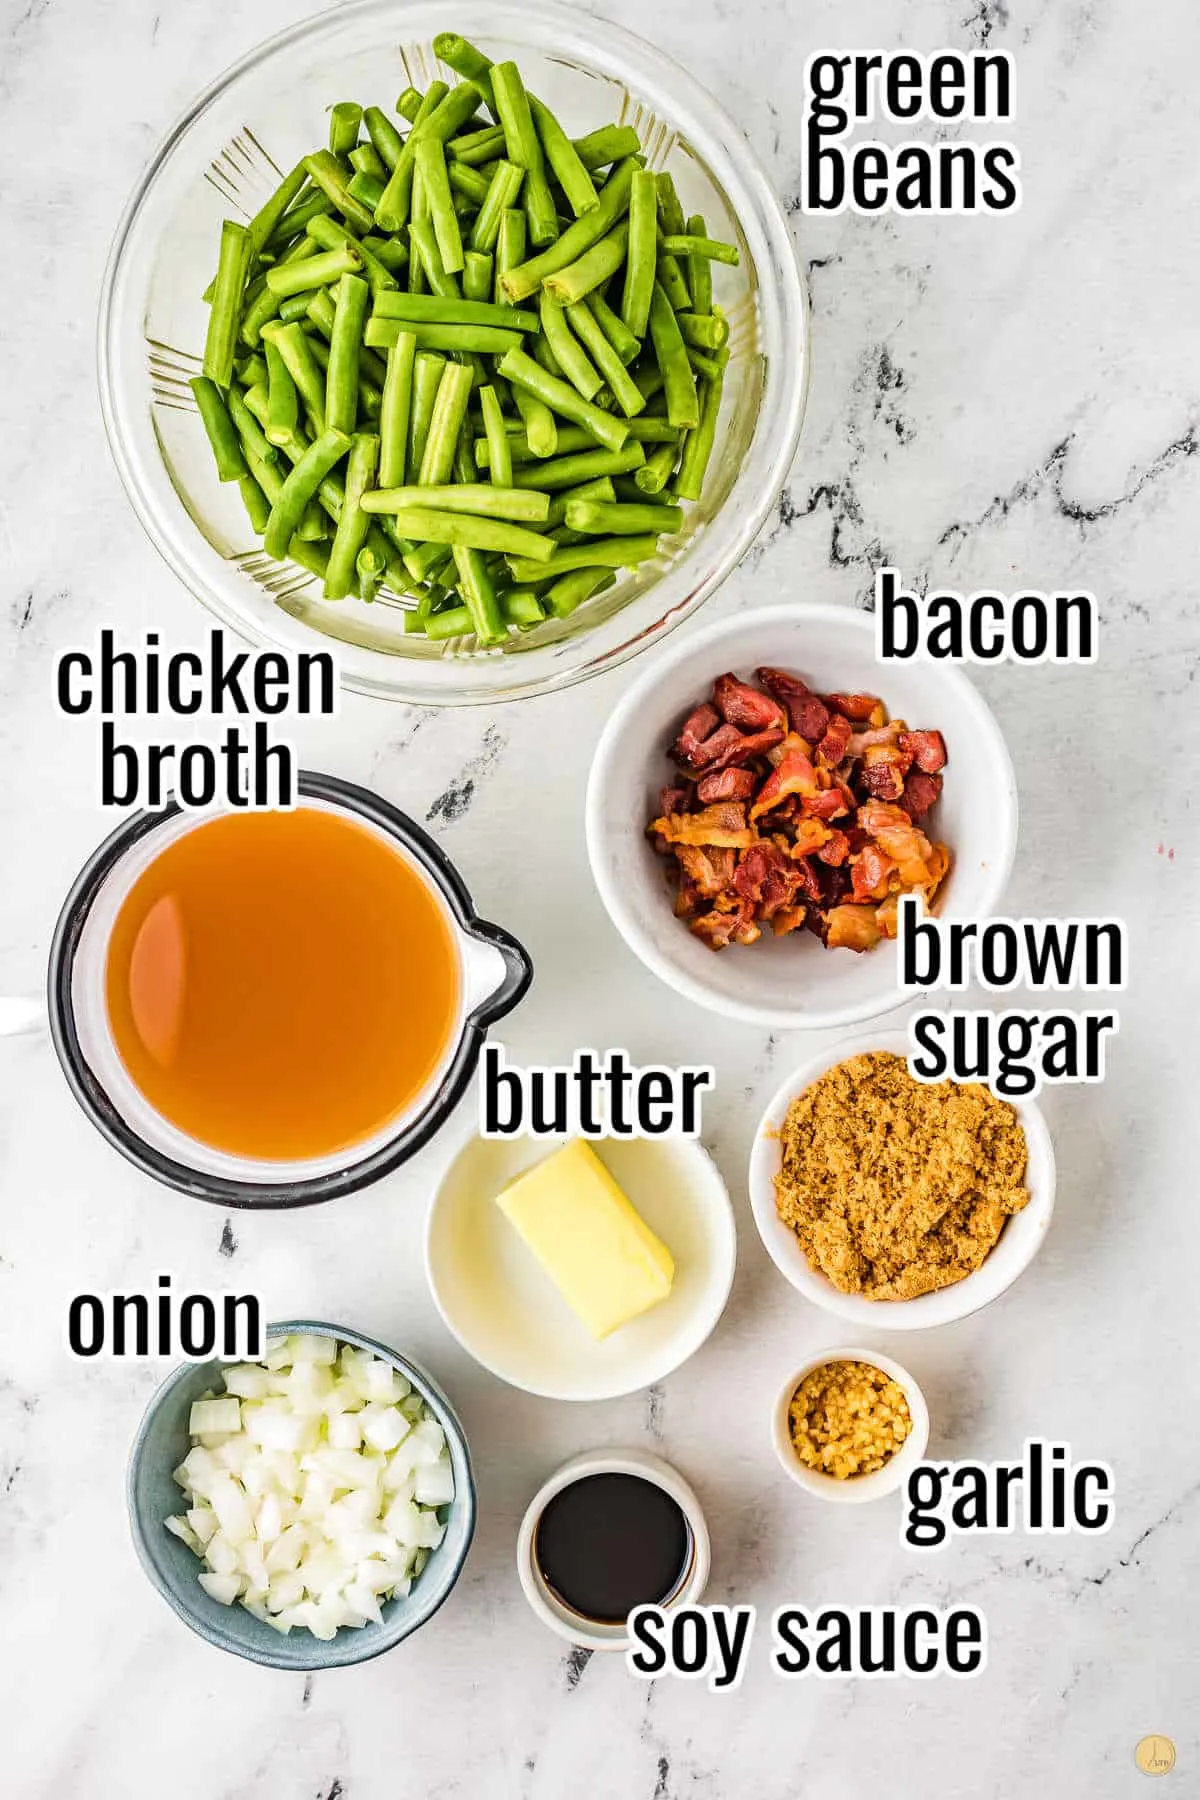 list of ingredients for this simple side dish